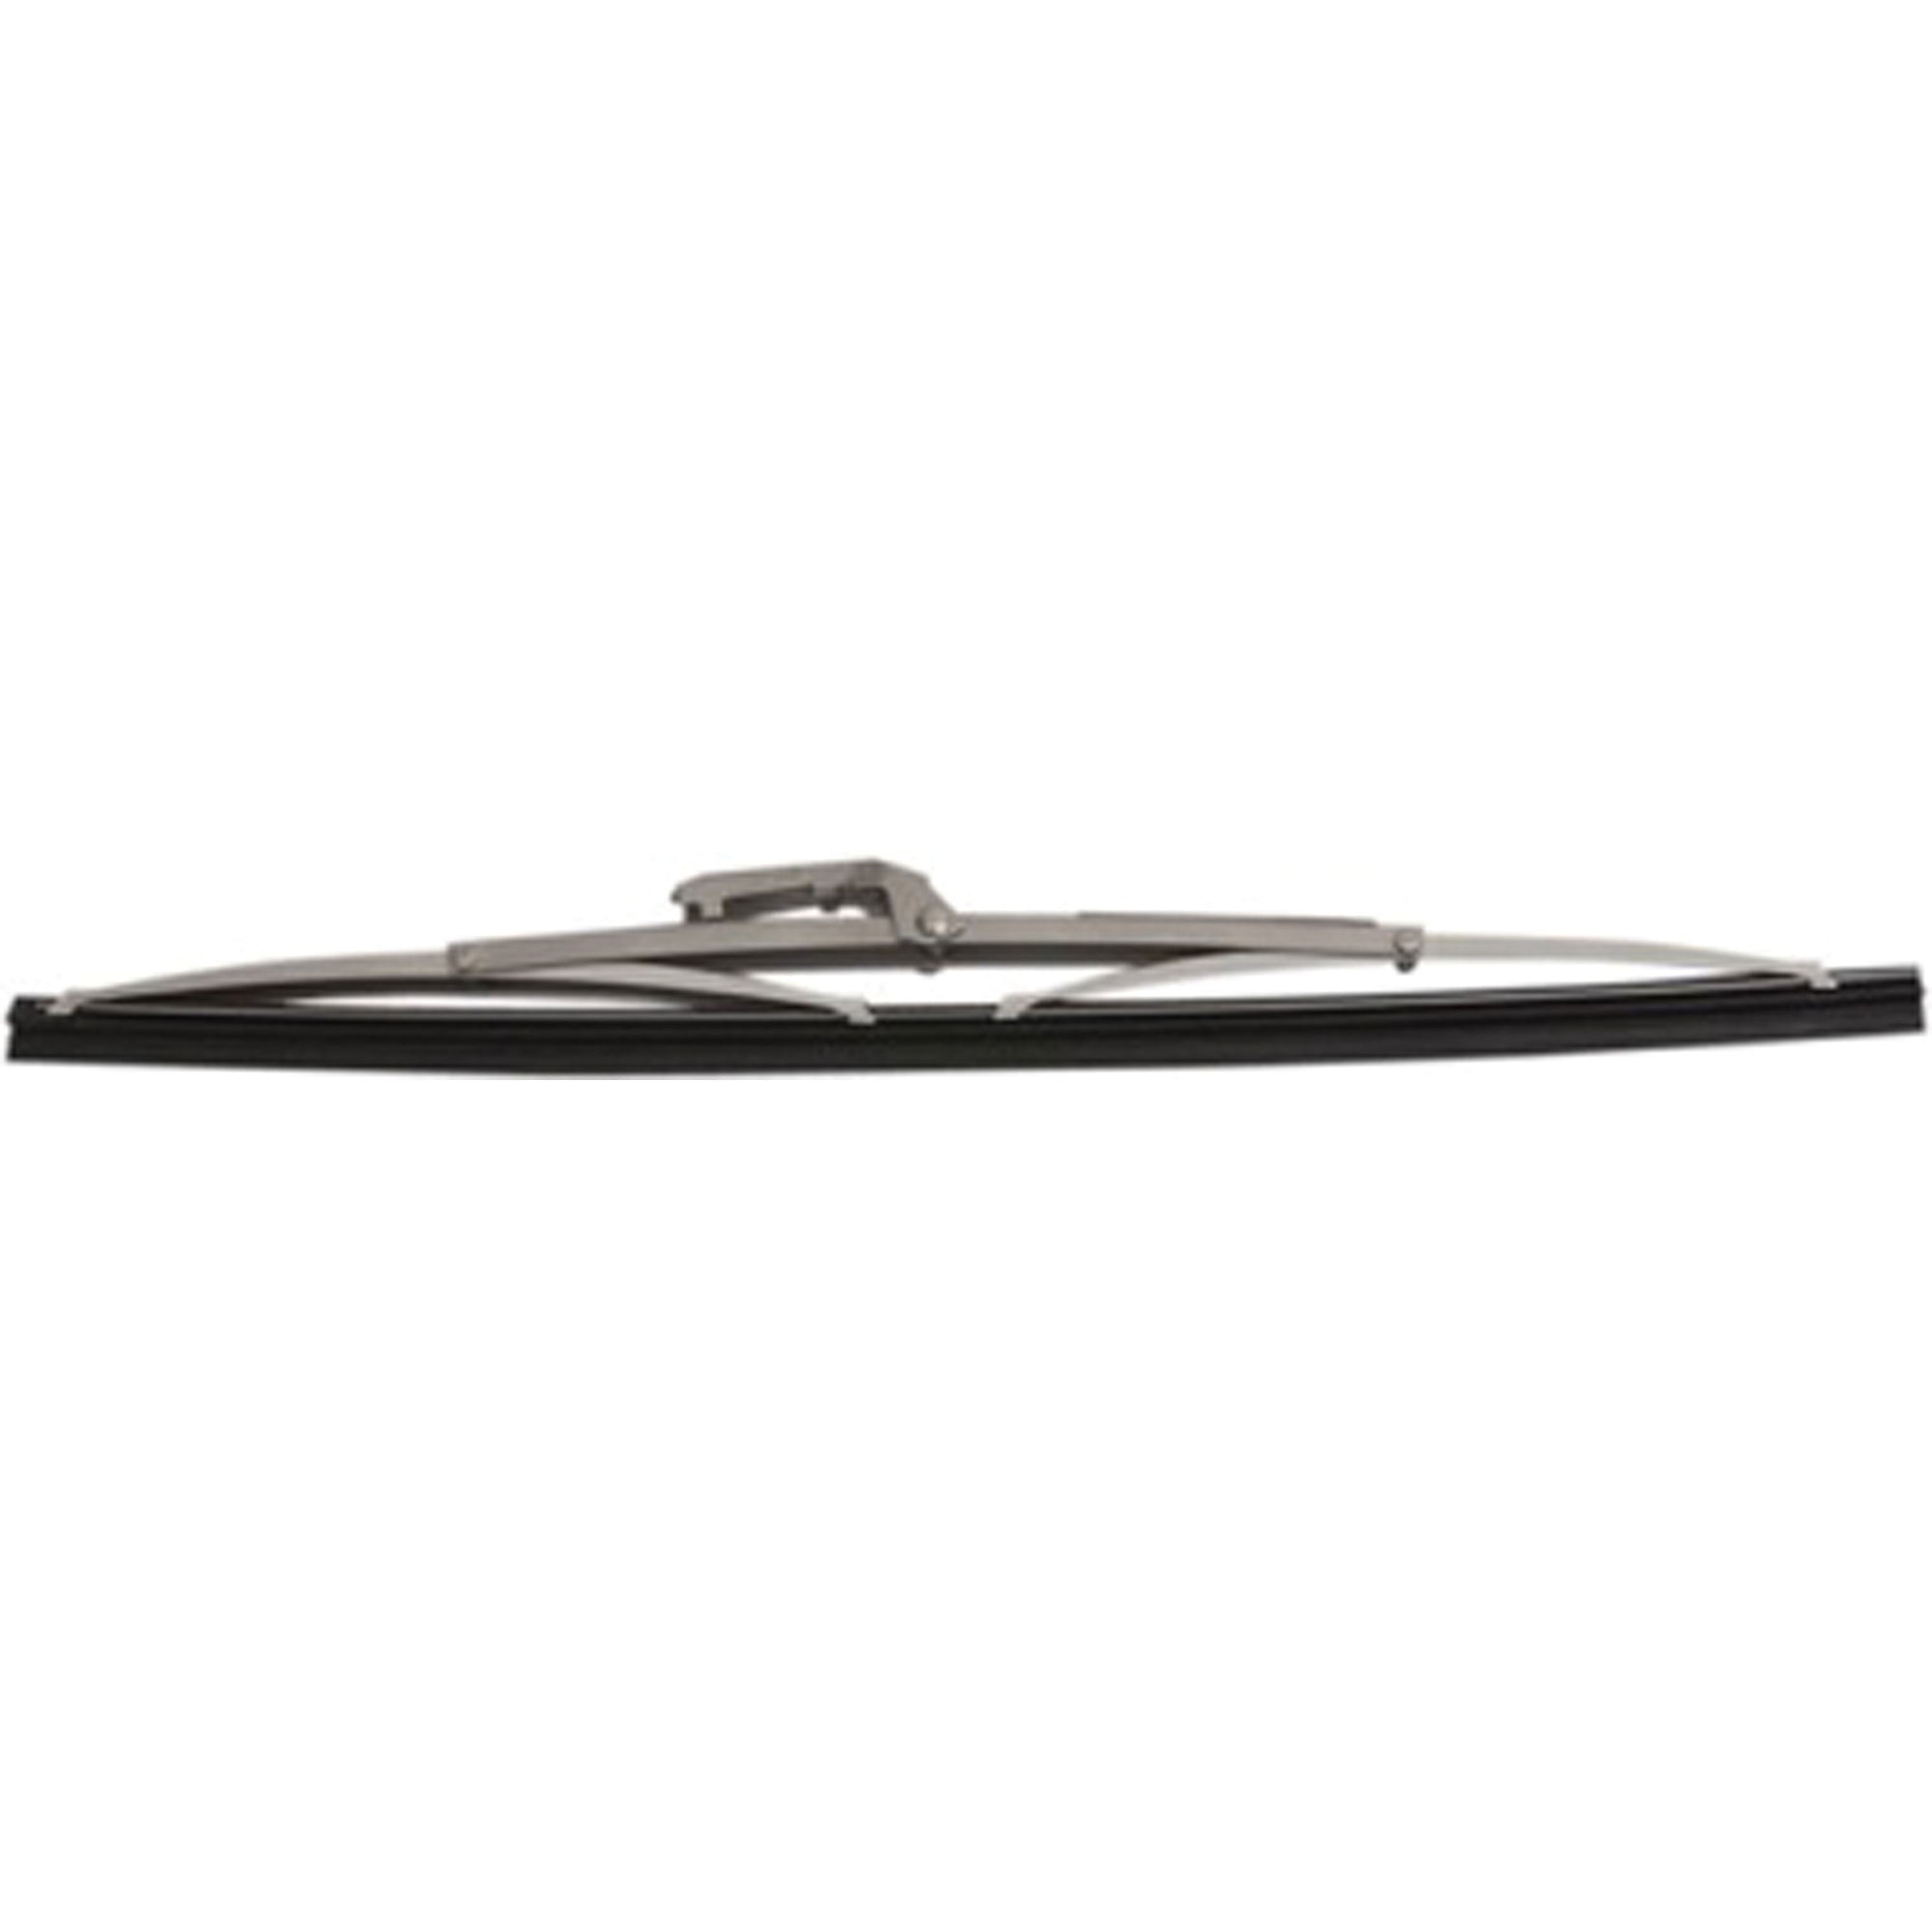 Sea-Dog 414220S-1 Stainless Steel Wiper Blade - 20", Silver